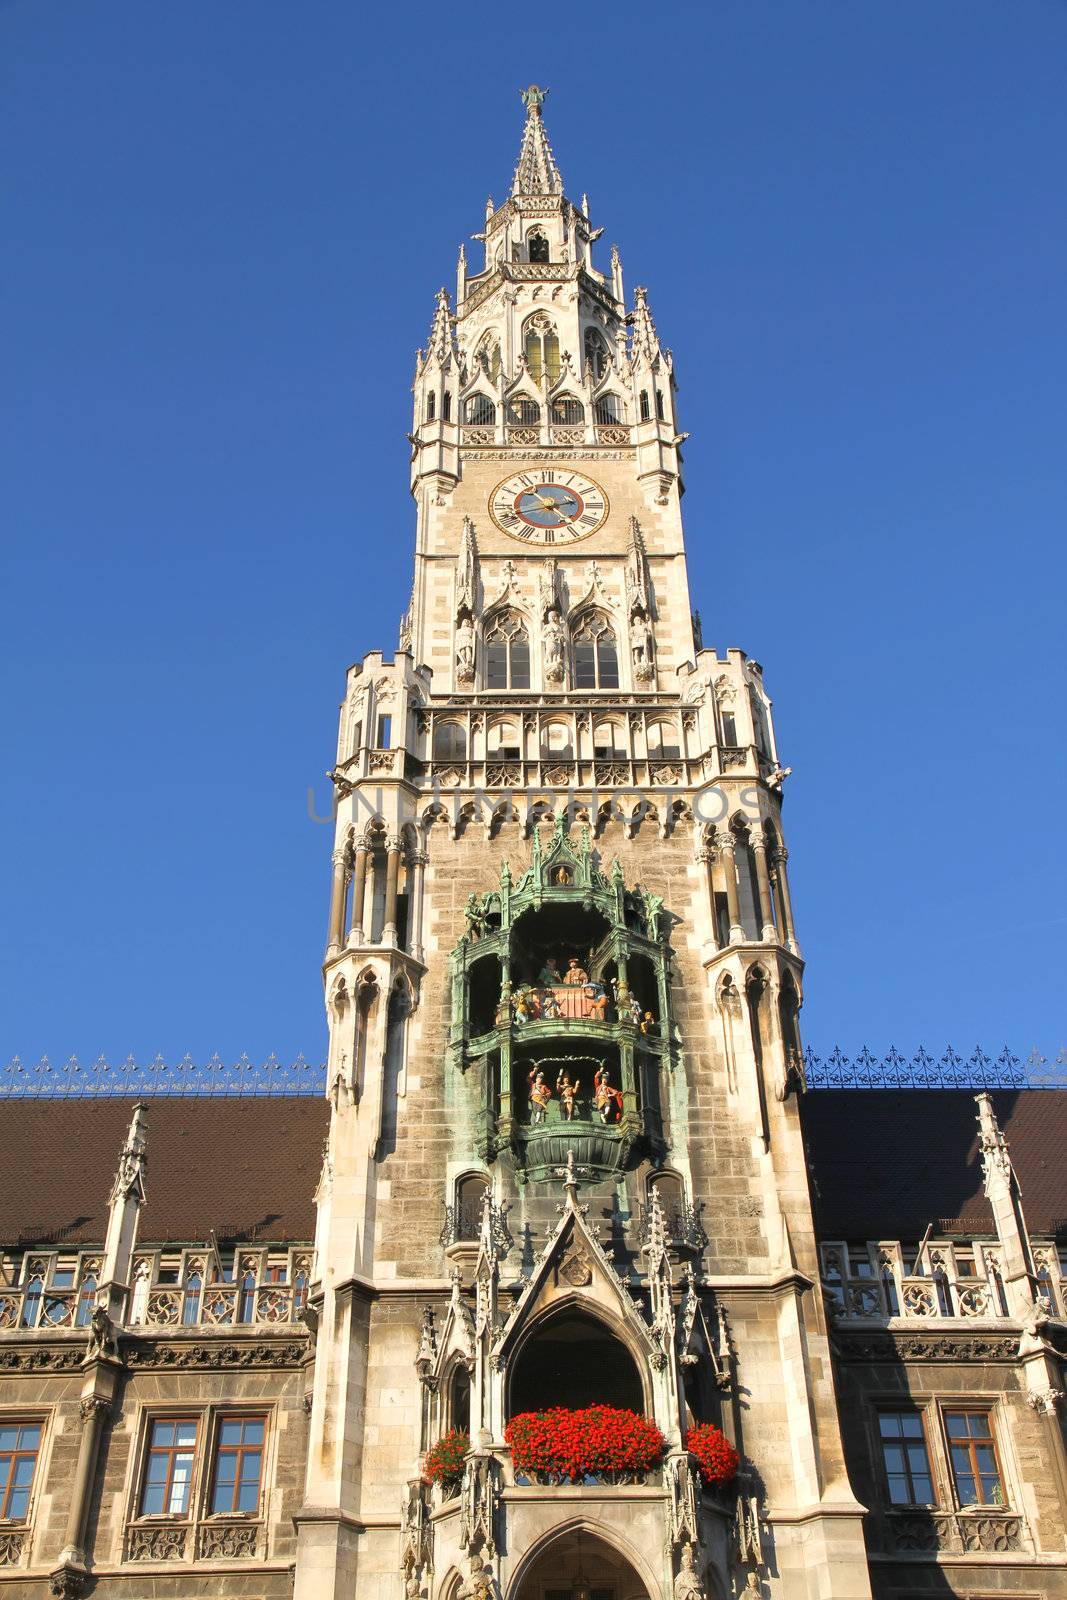 Historic building in the center of Munich, Germany. The Rathaus at the Marienplatz.